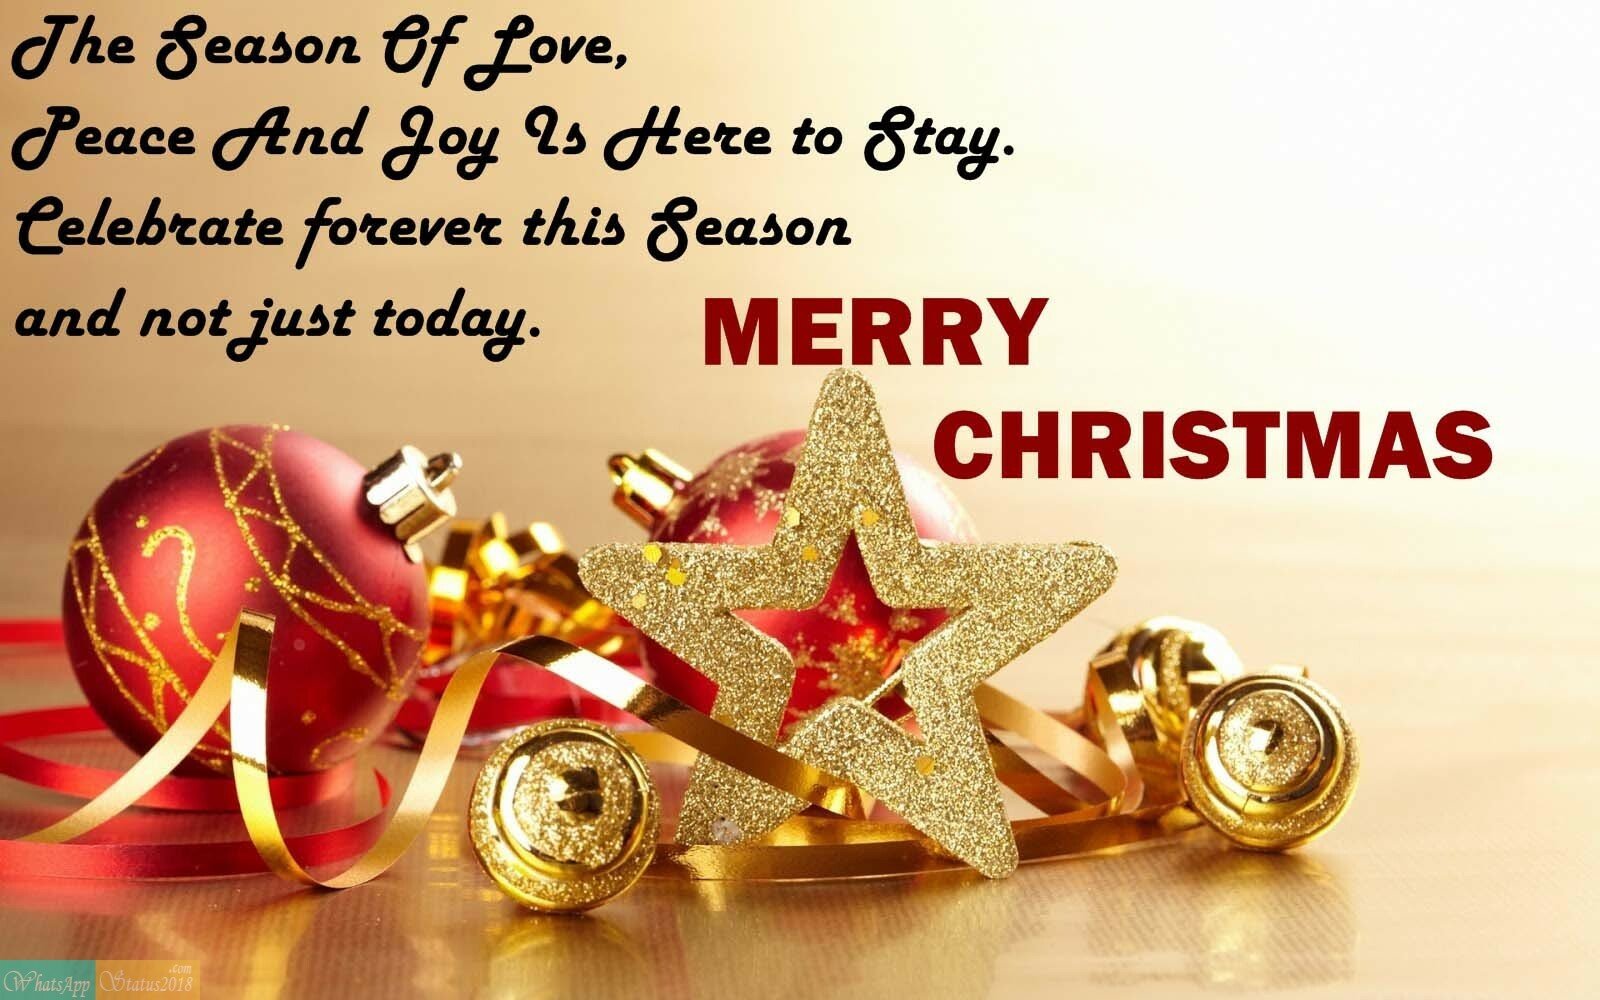 Merry Christmas HD Images, Xmas Pictures, Messages Photos